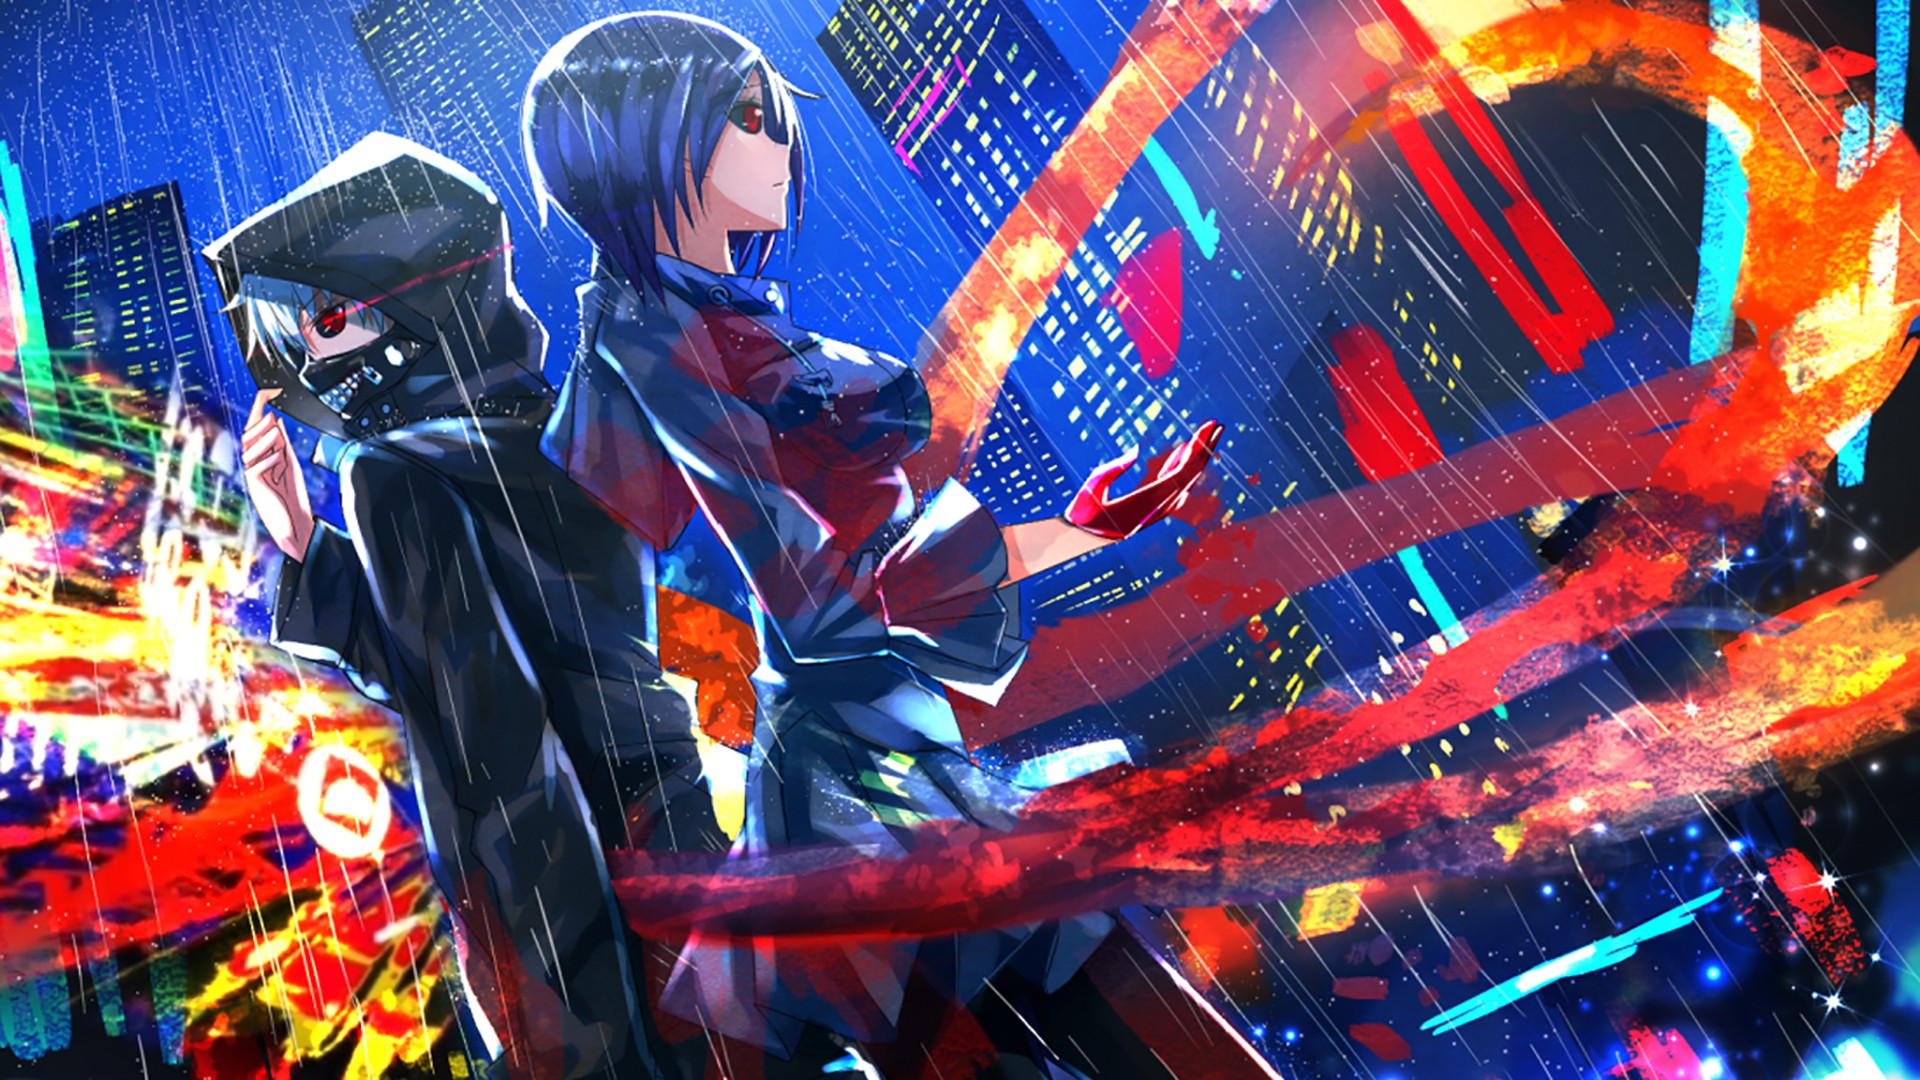 Tokyo Ghoul Re Touka Wallpapers